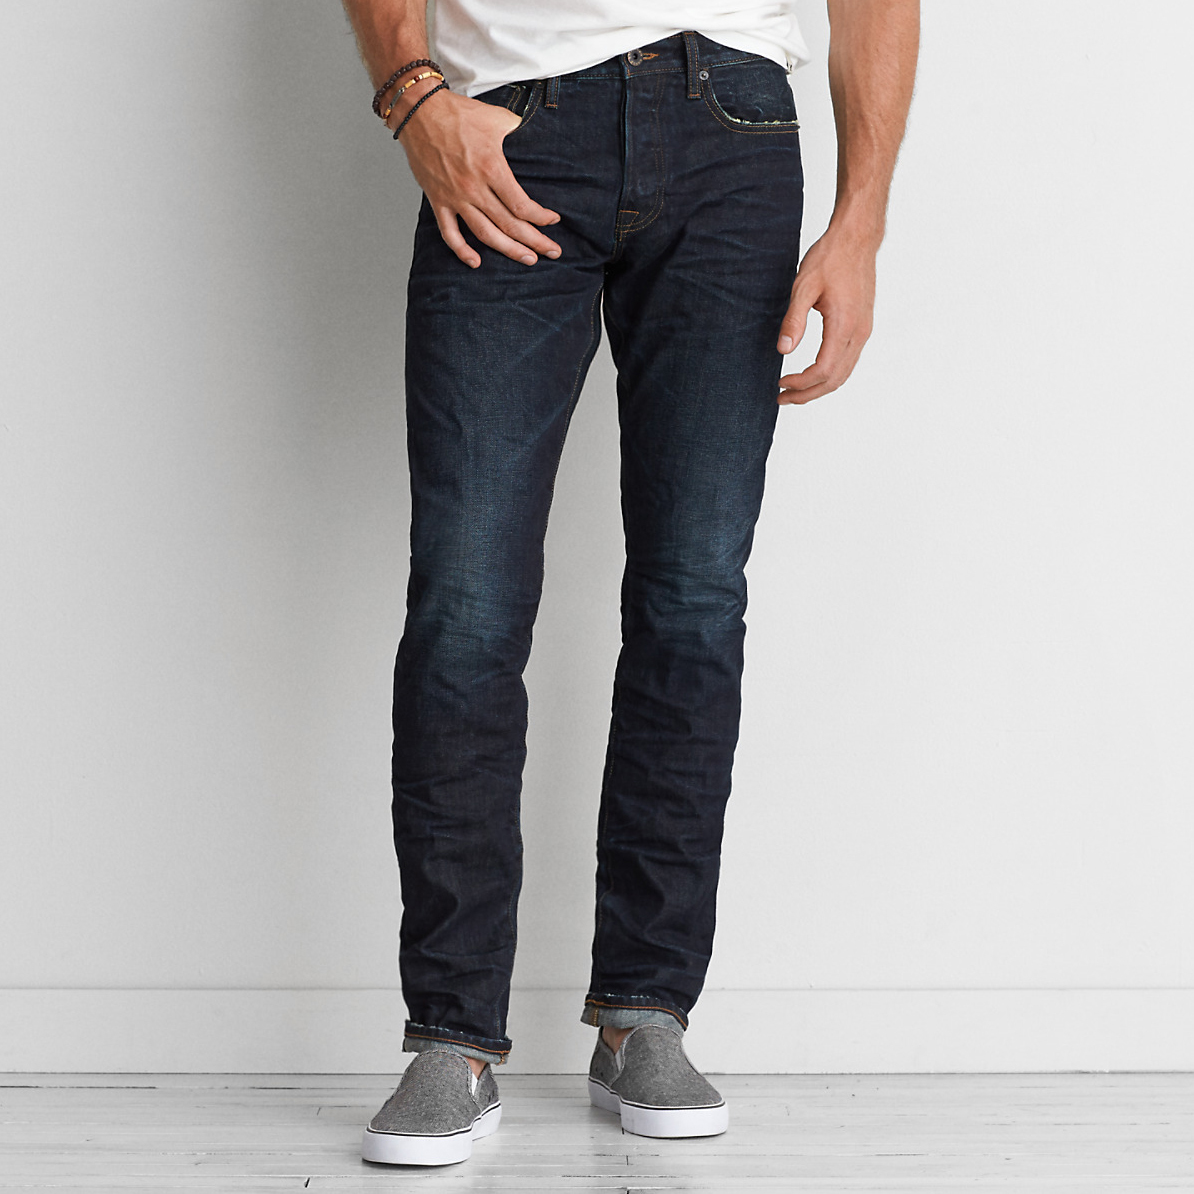 Men’s Denim: How to Pull it Off in the Office | Cotton